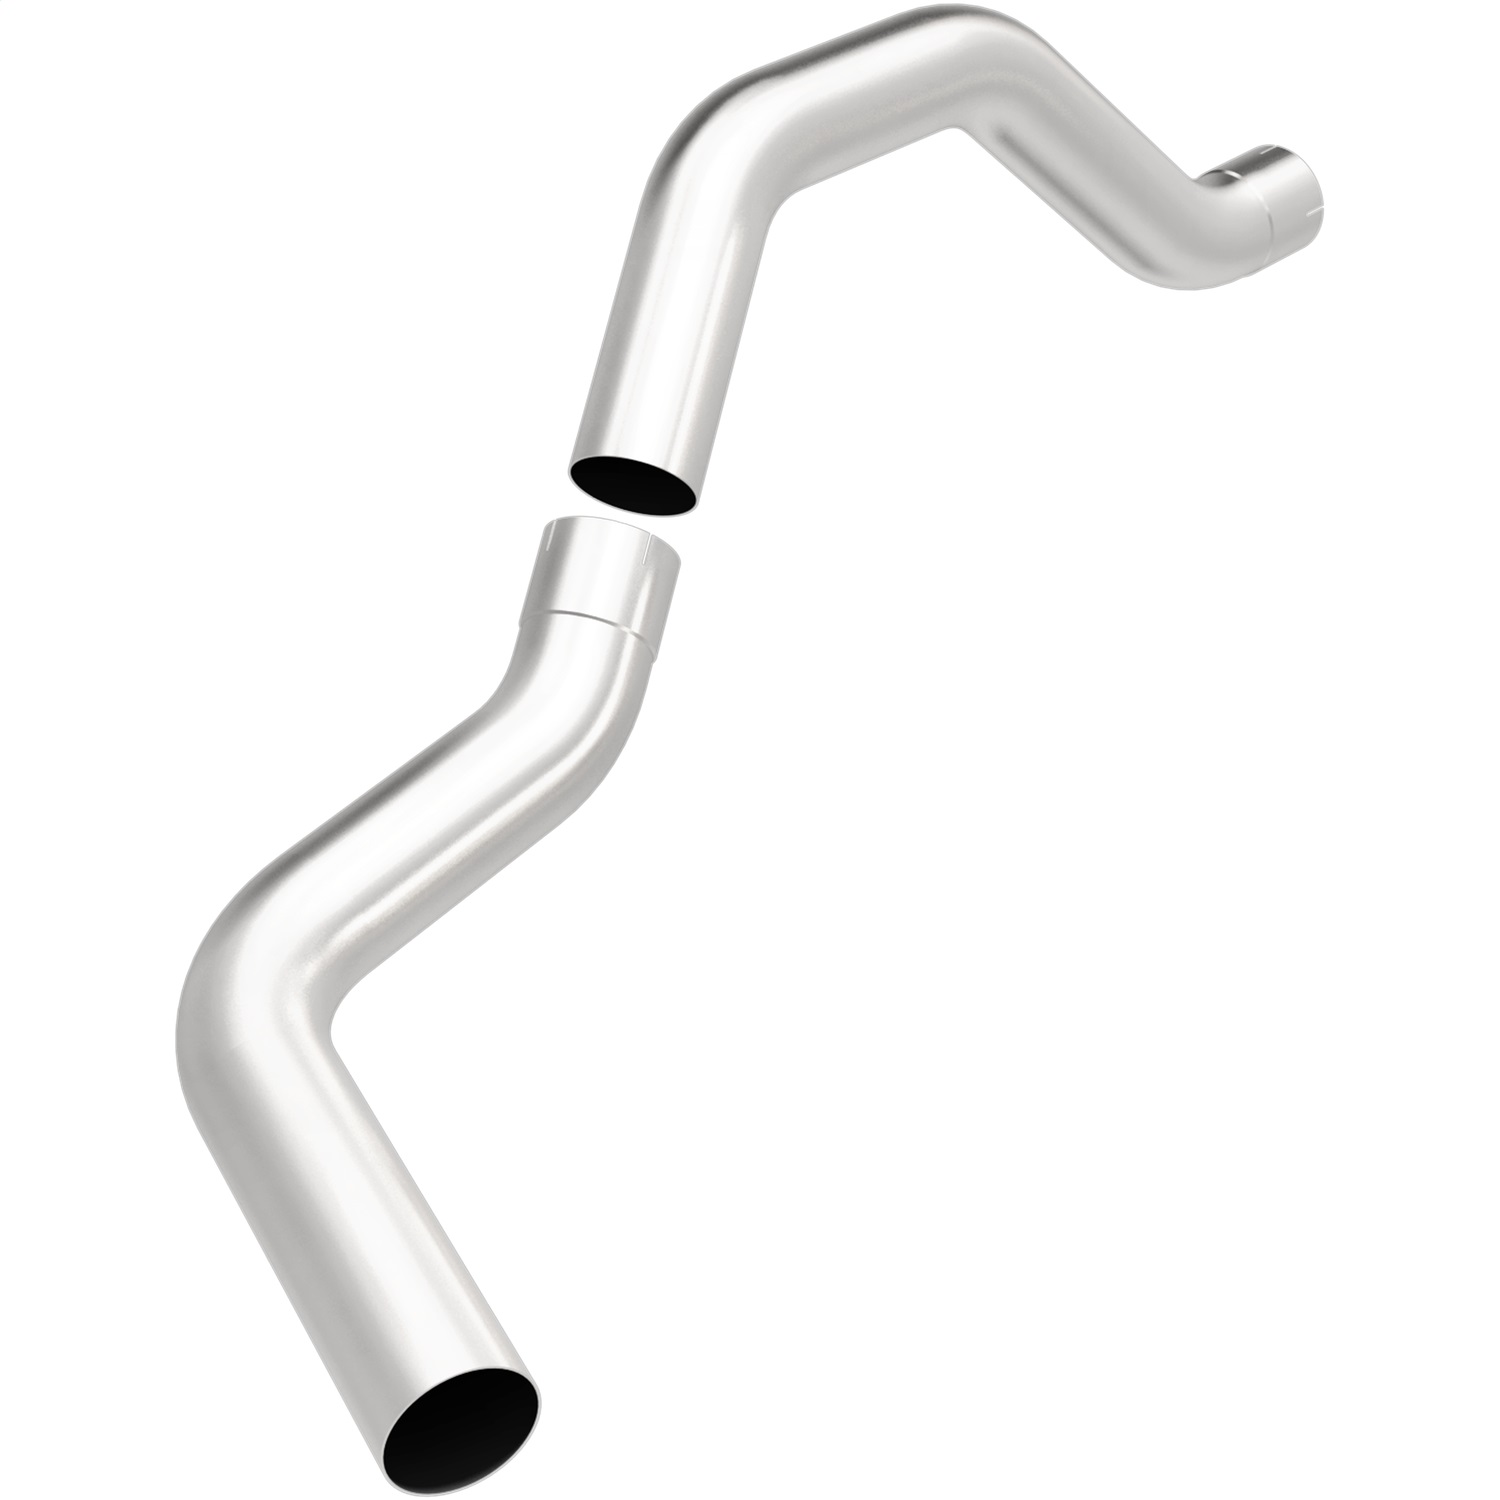 Magnaflow Performance Exhaust Magnaflow Performance Exhaust 15397 Stainless Steel Tail Pipe